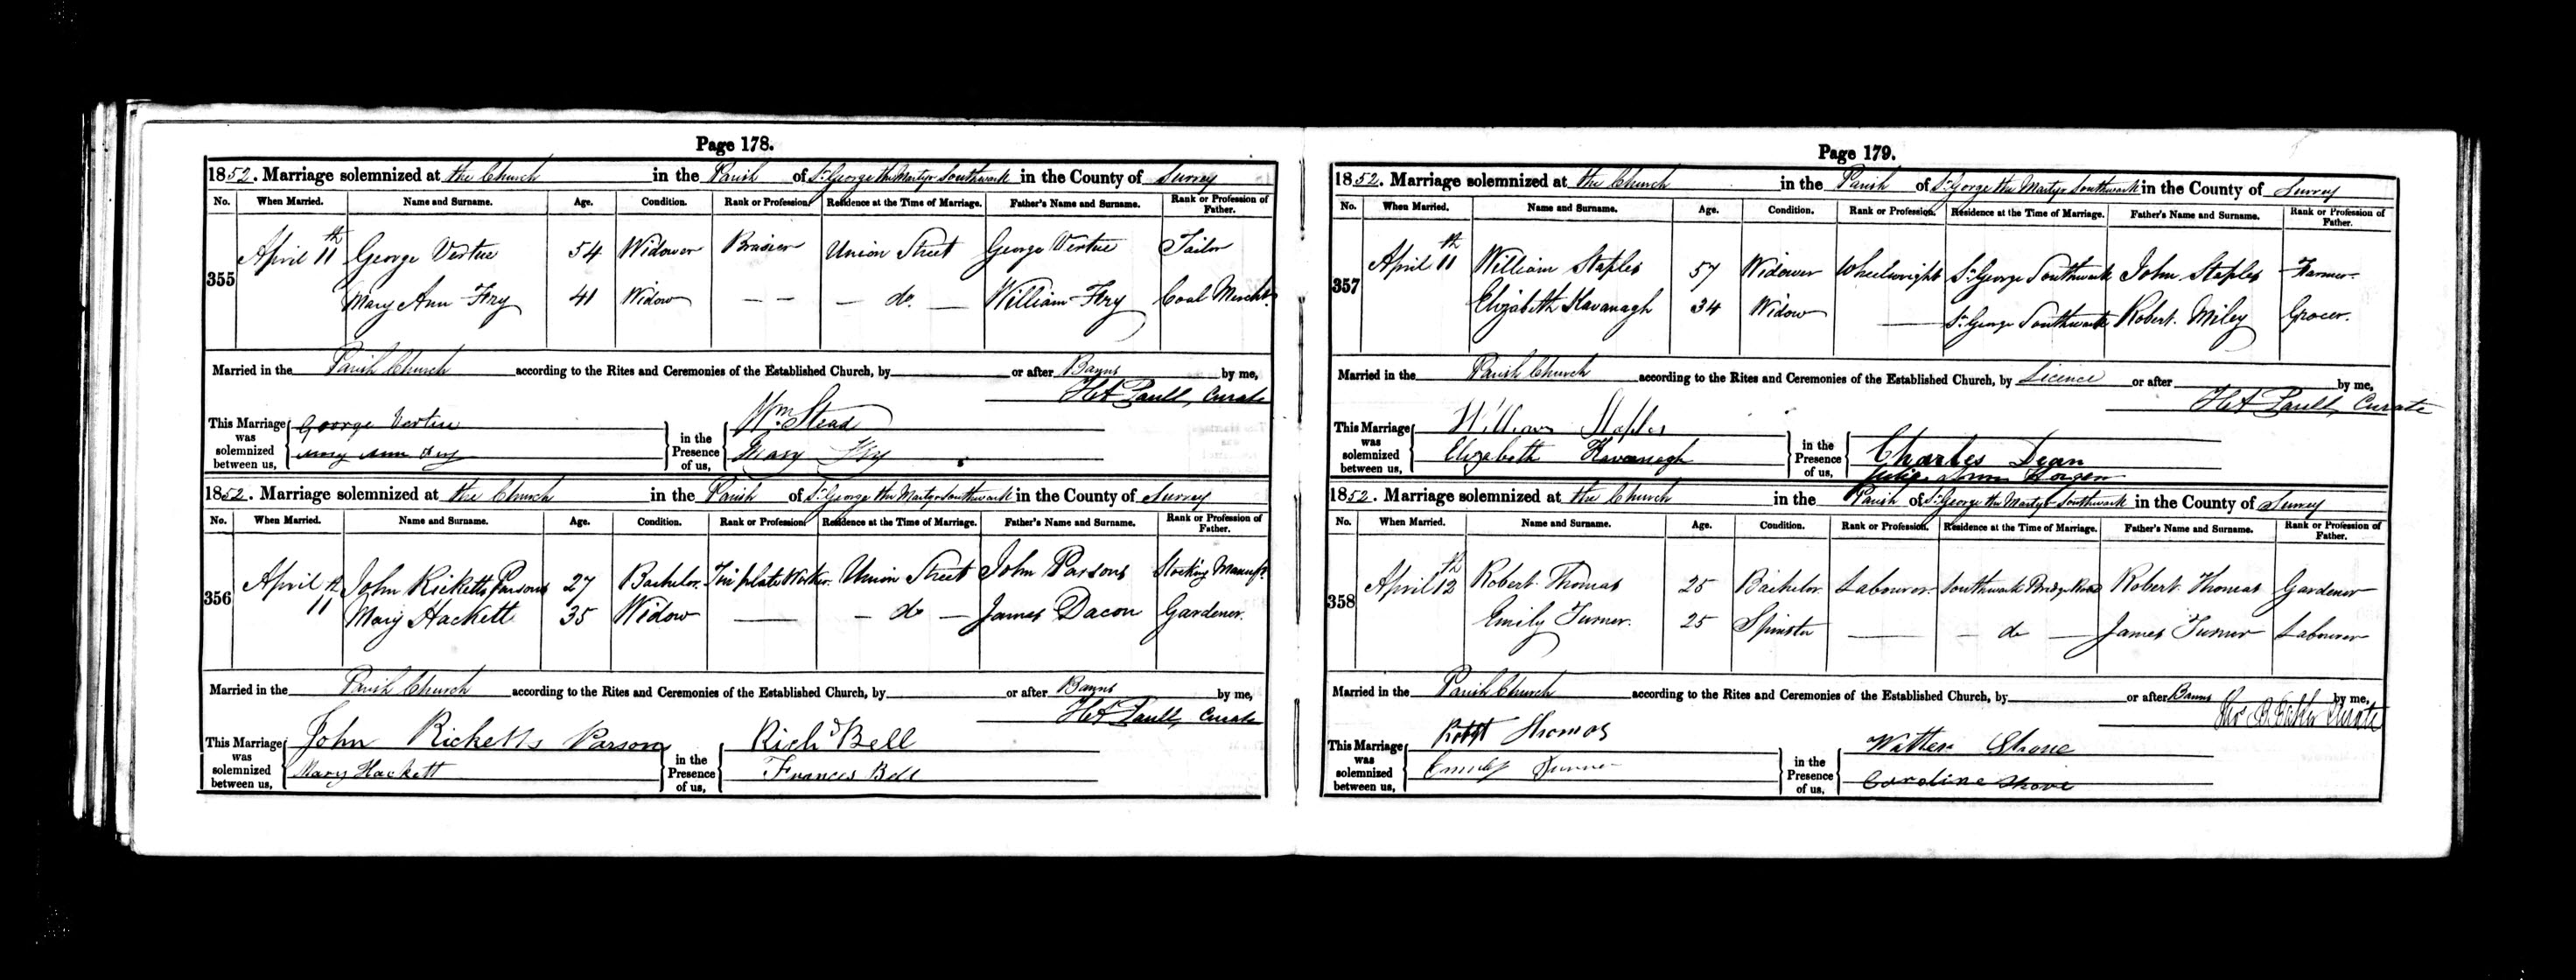 1852 marriage of Mary Ann Fry to George Vertue